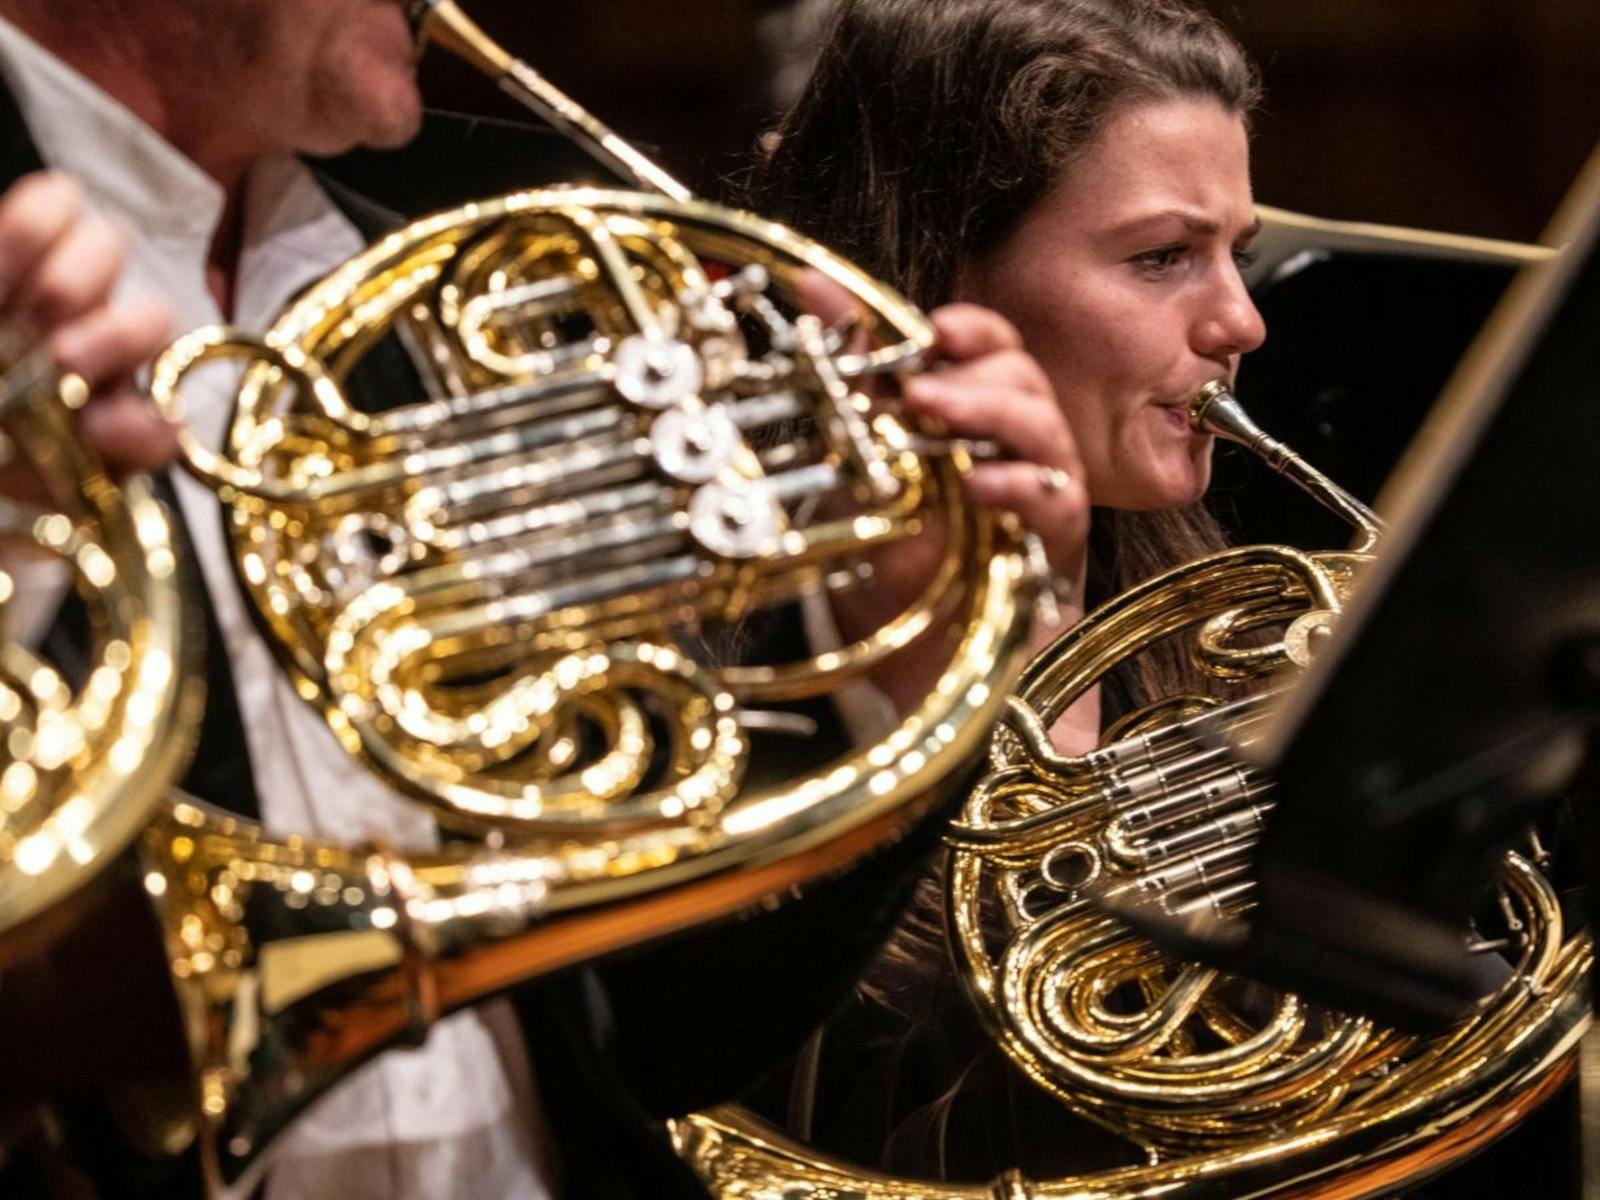 Photograph of three french horn players.